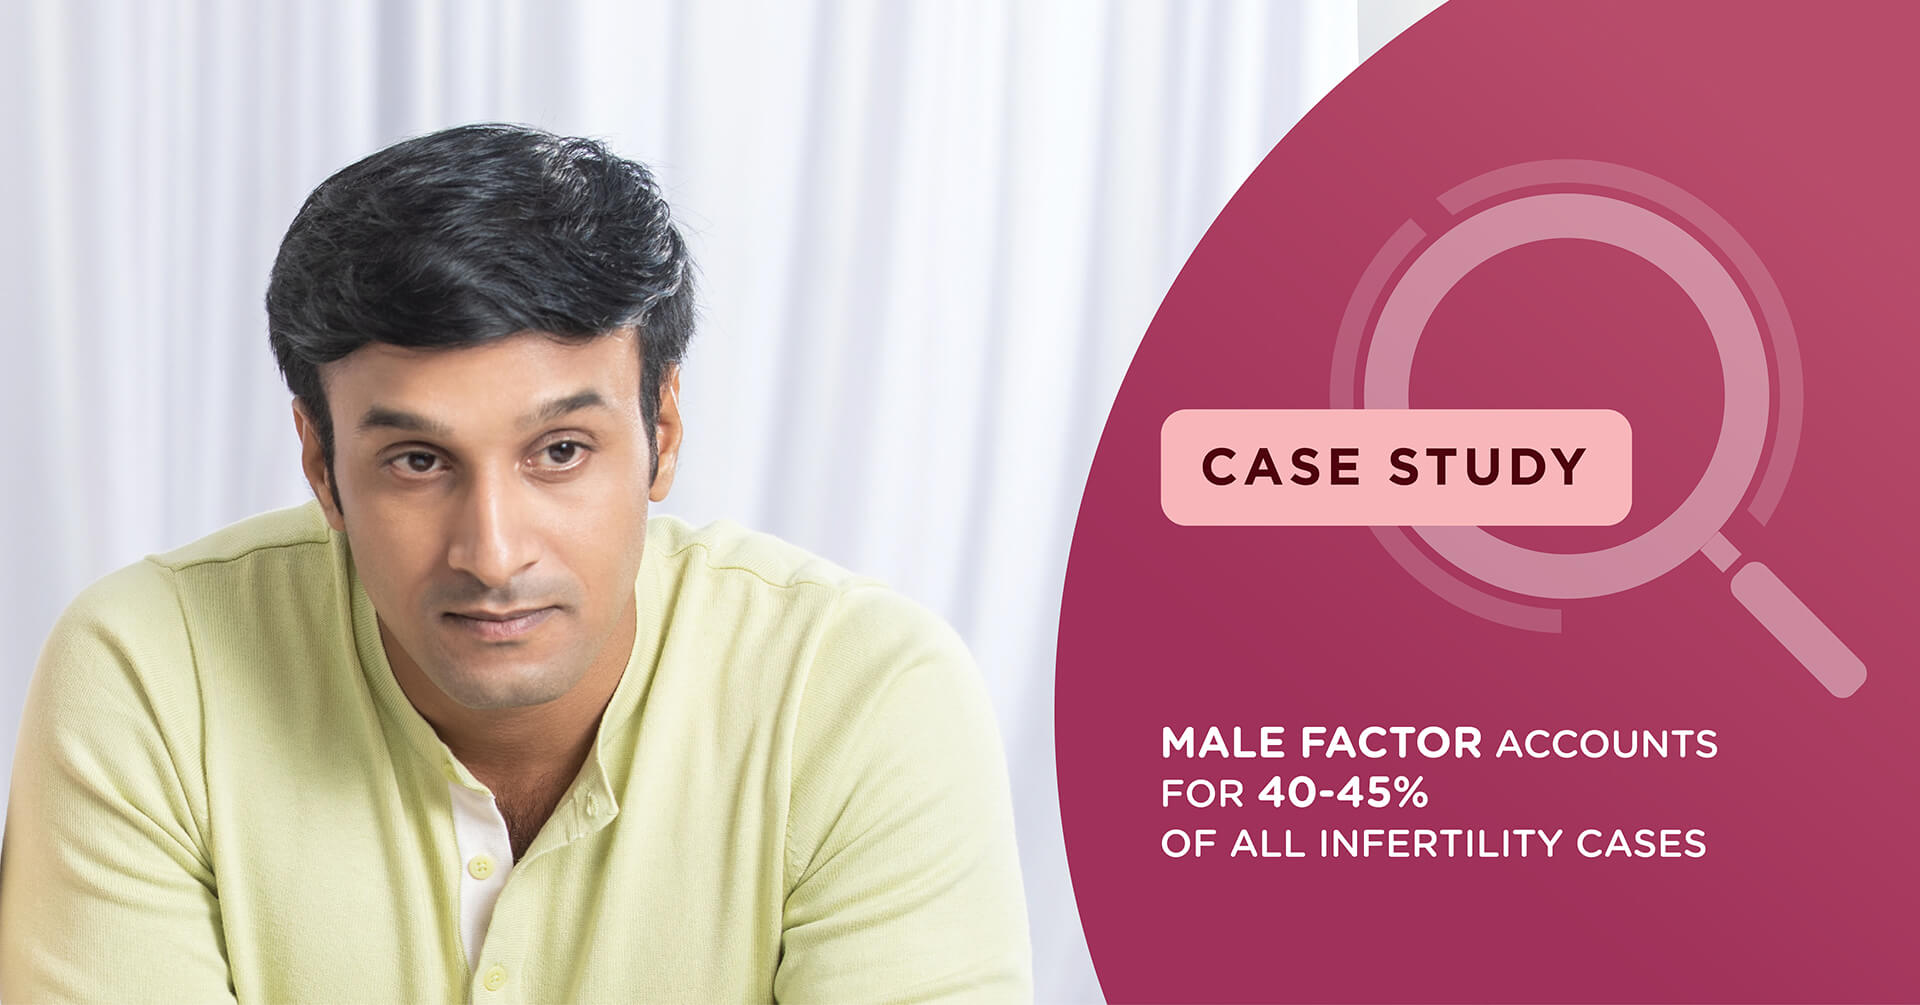 Male factor accounts for 40-45% of all infertility cases